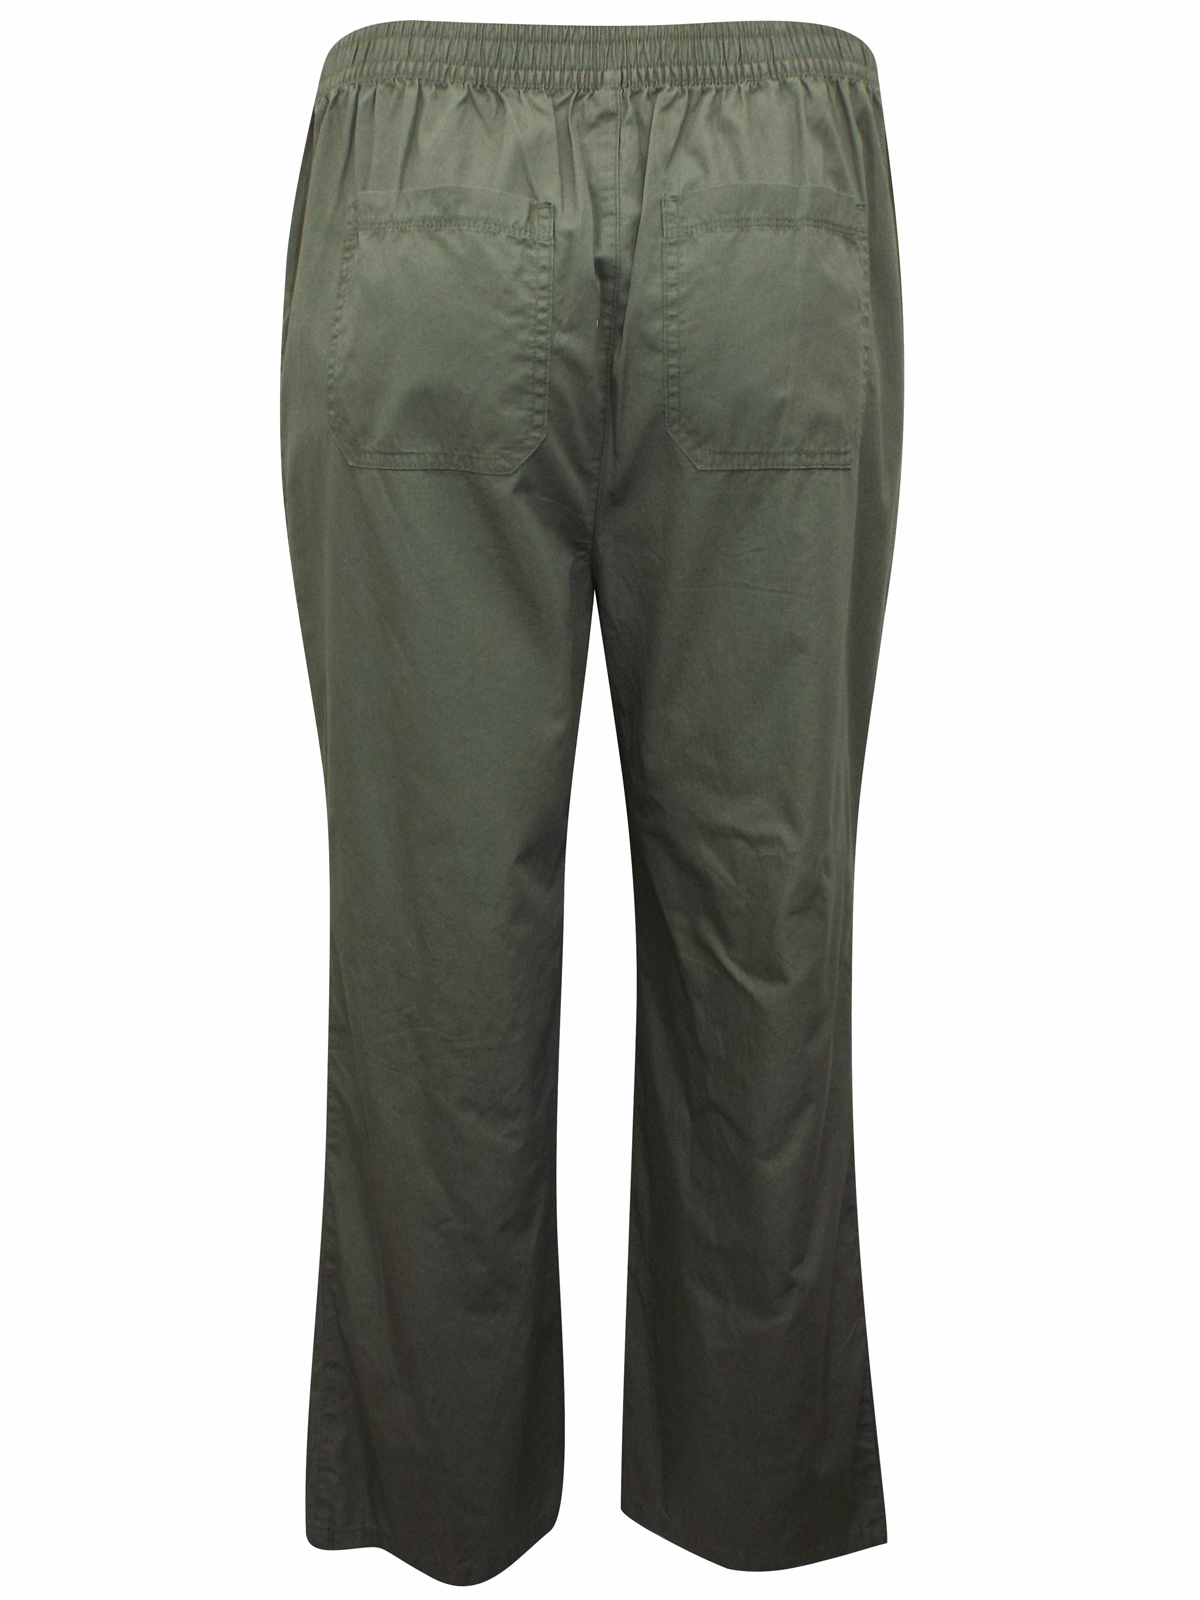 Marks and Spencer - - M&5 KHAKI Pure Cotton Straight Leg Trousers - Size 18